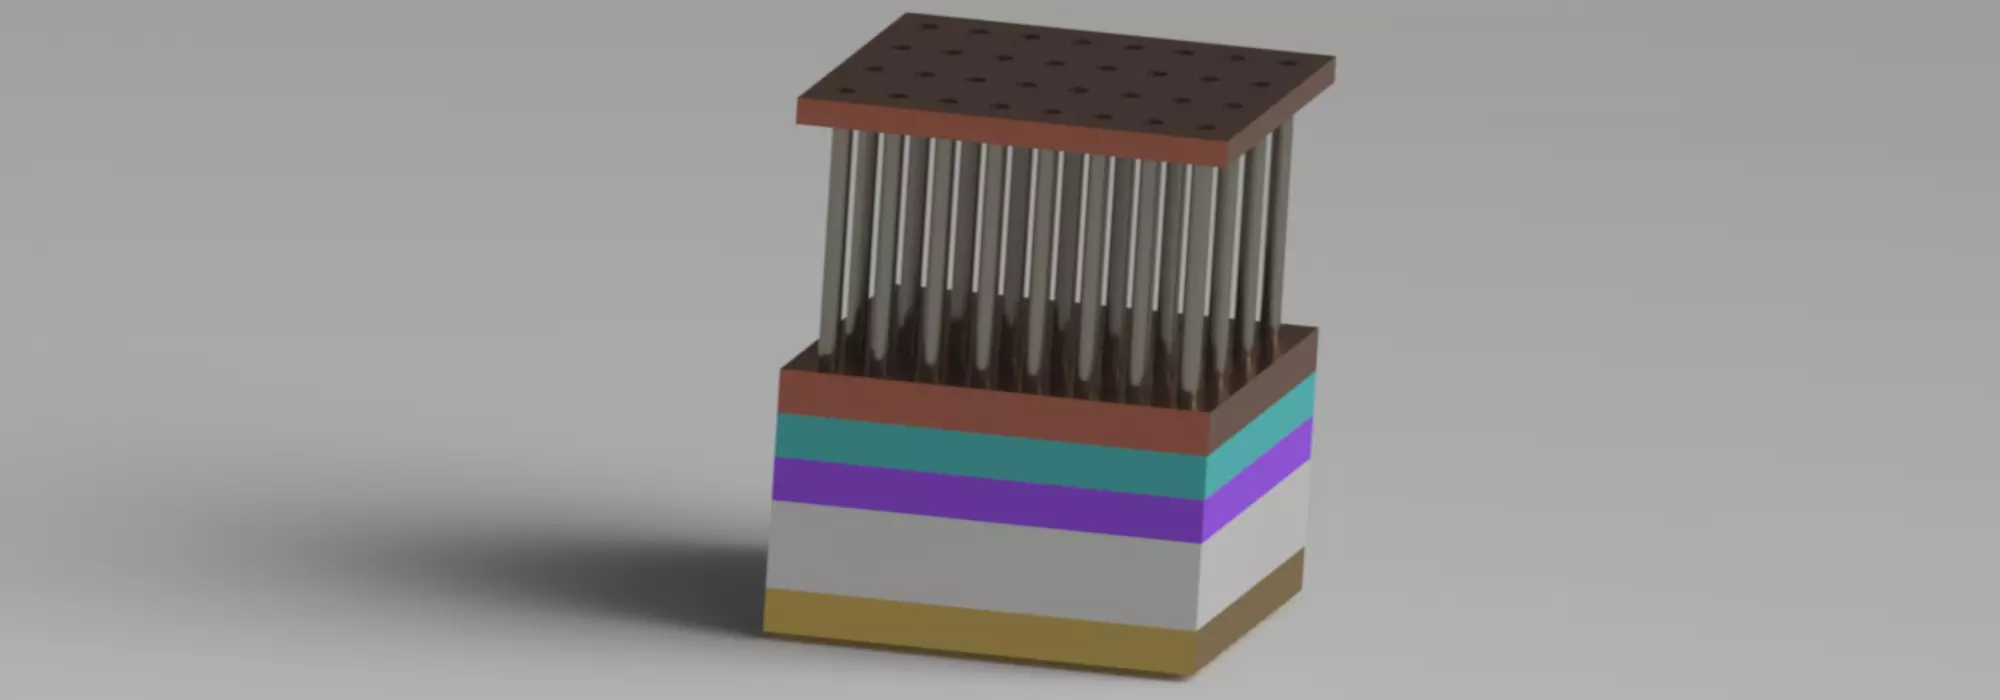 3D printed transistor with tubes